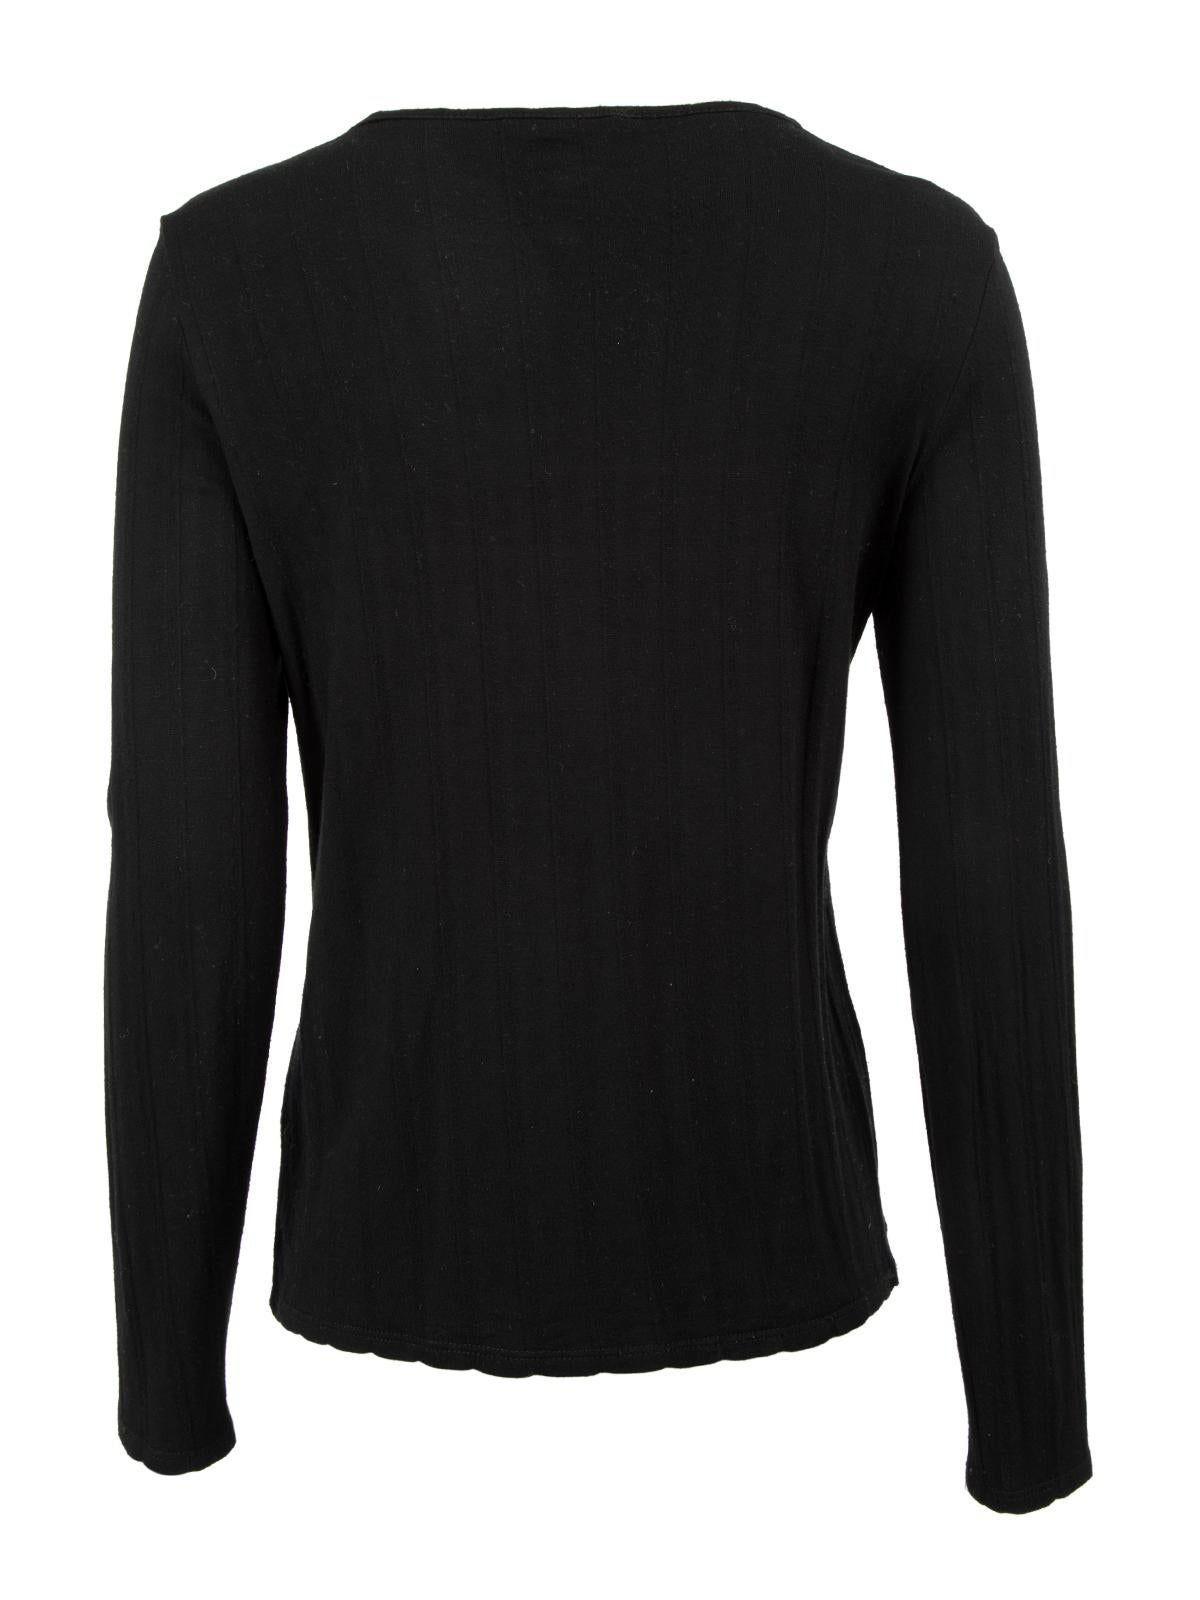 Black Long Sleeve Top Size M In Good Condition For Sale In London, GB